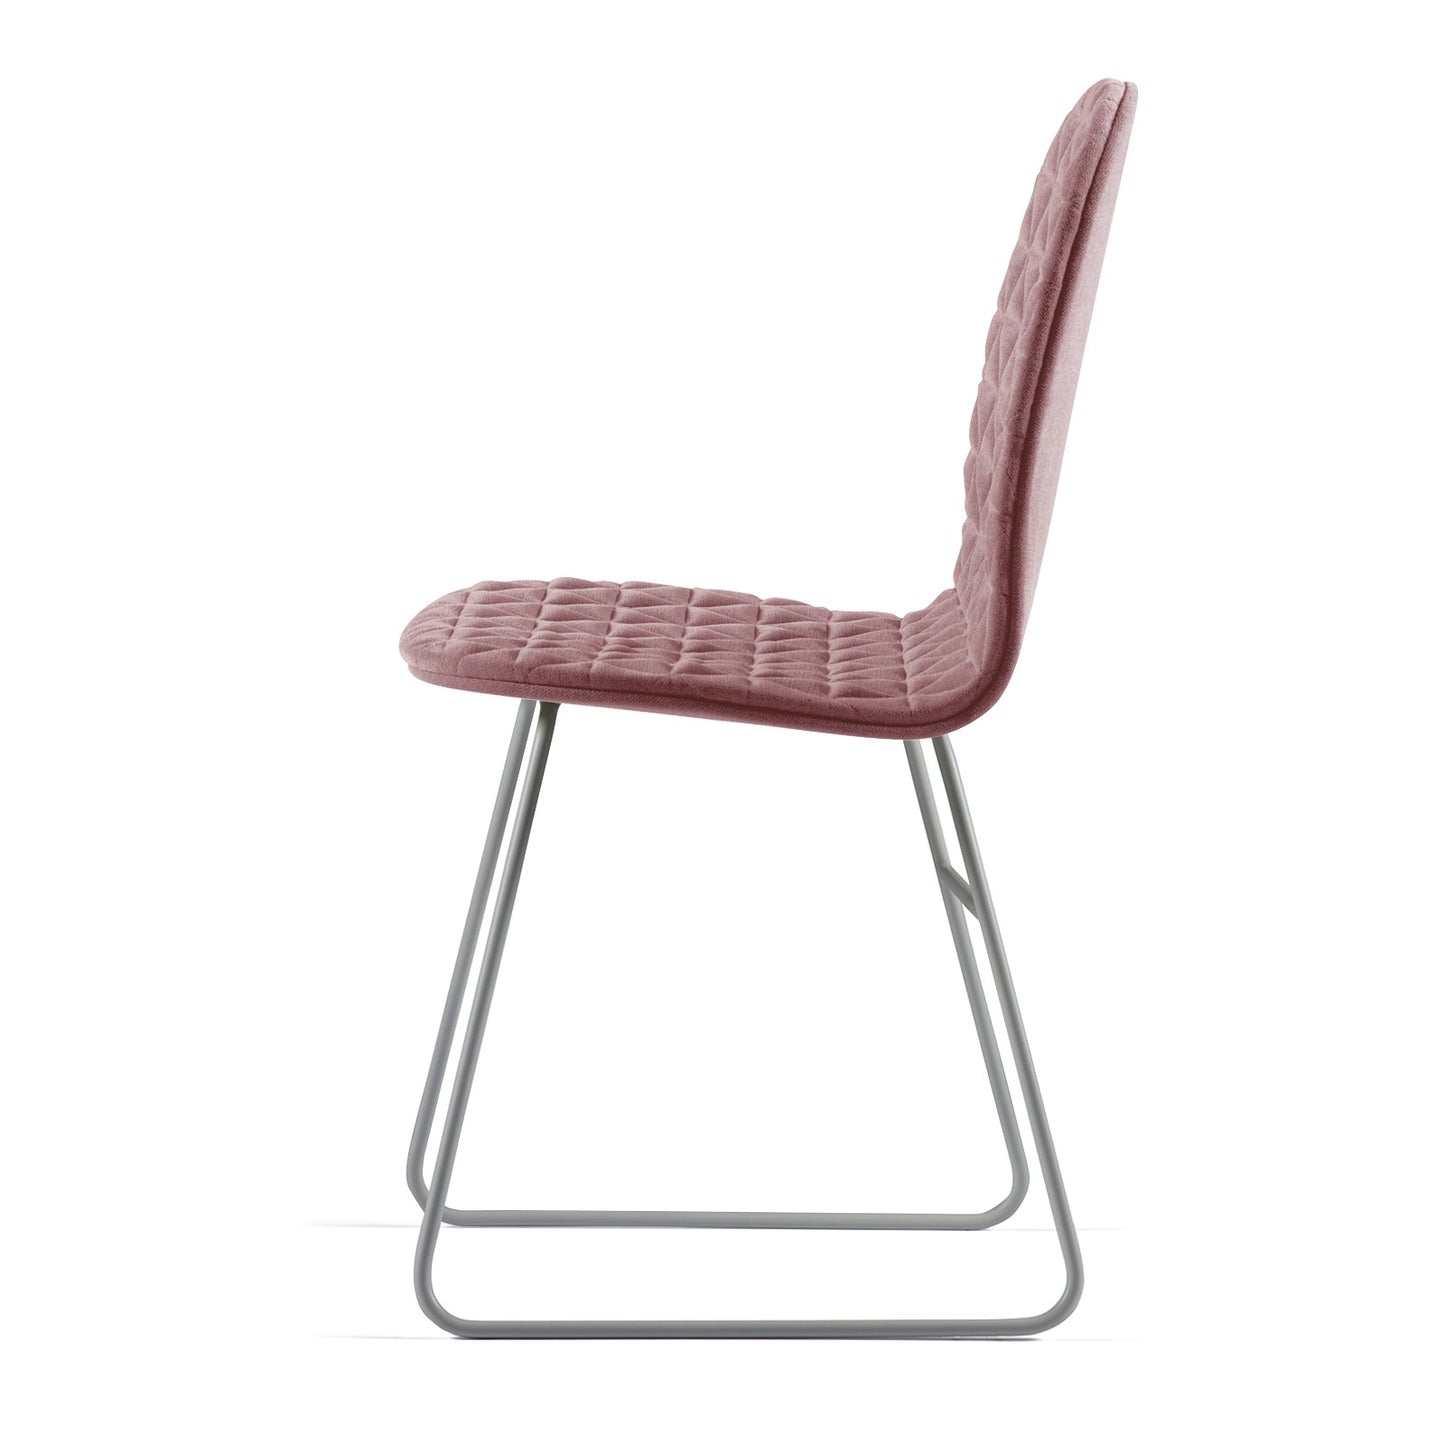 Chair Mannequin 02 - Dusty Rose